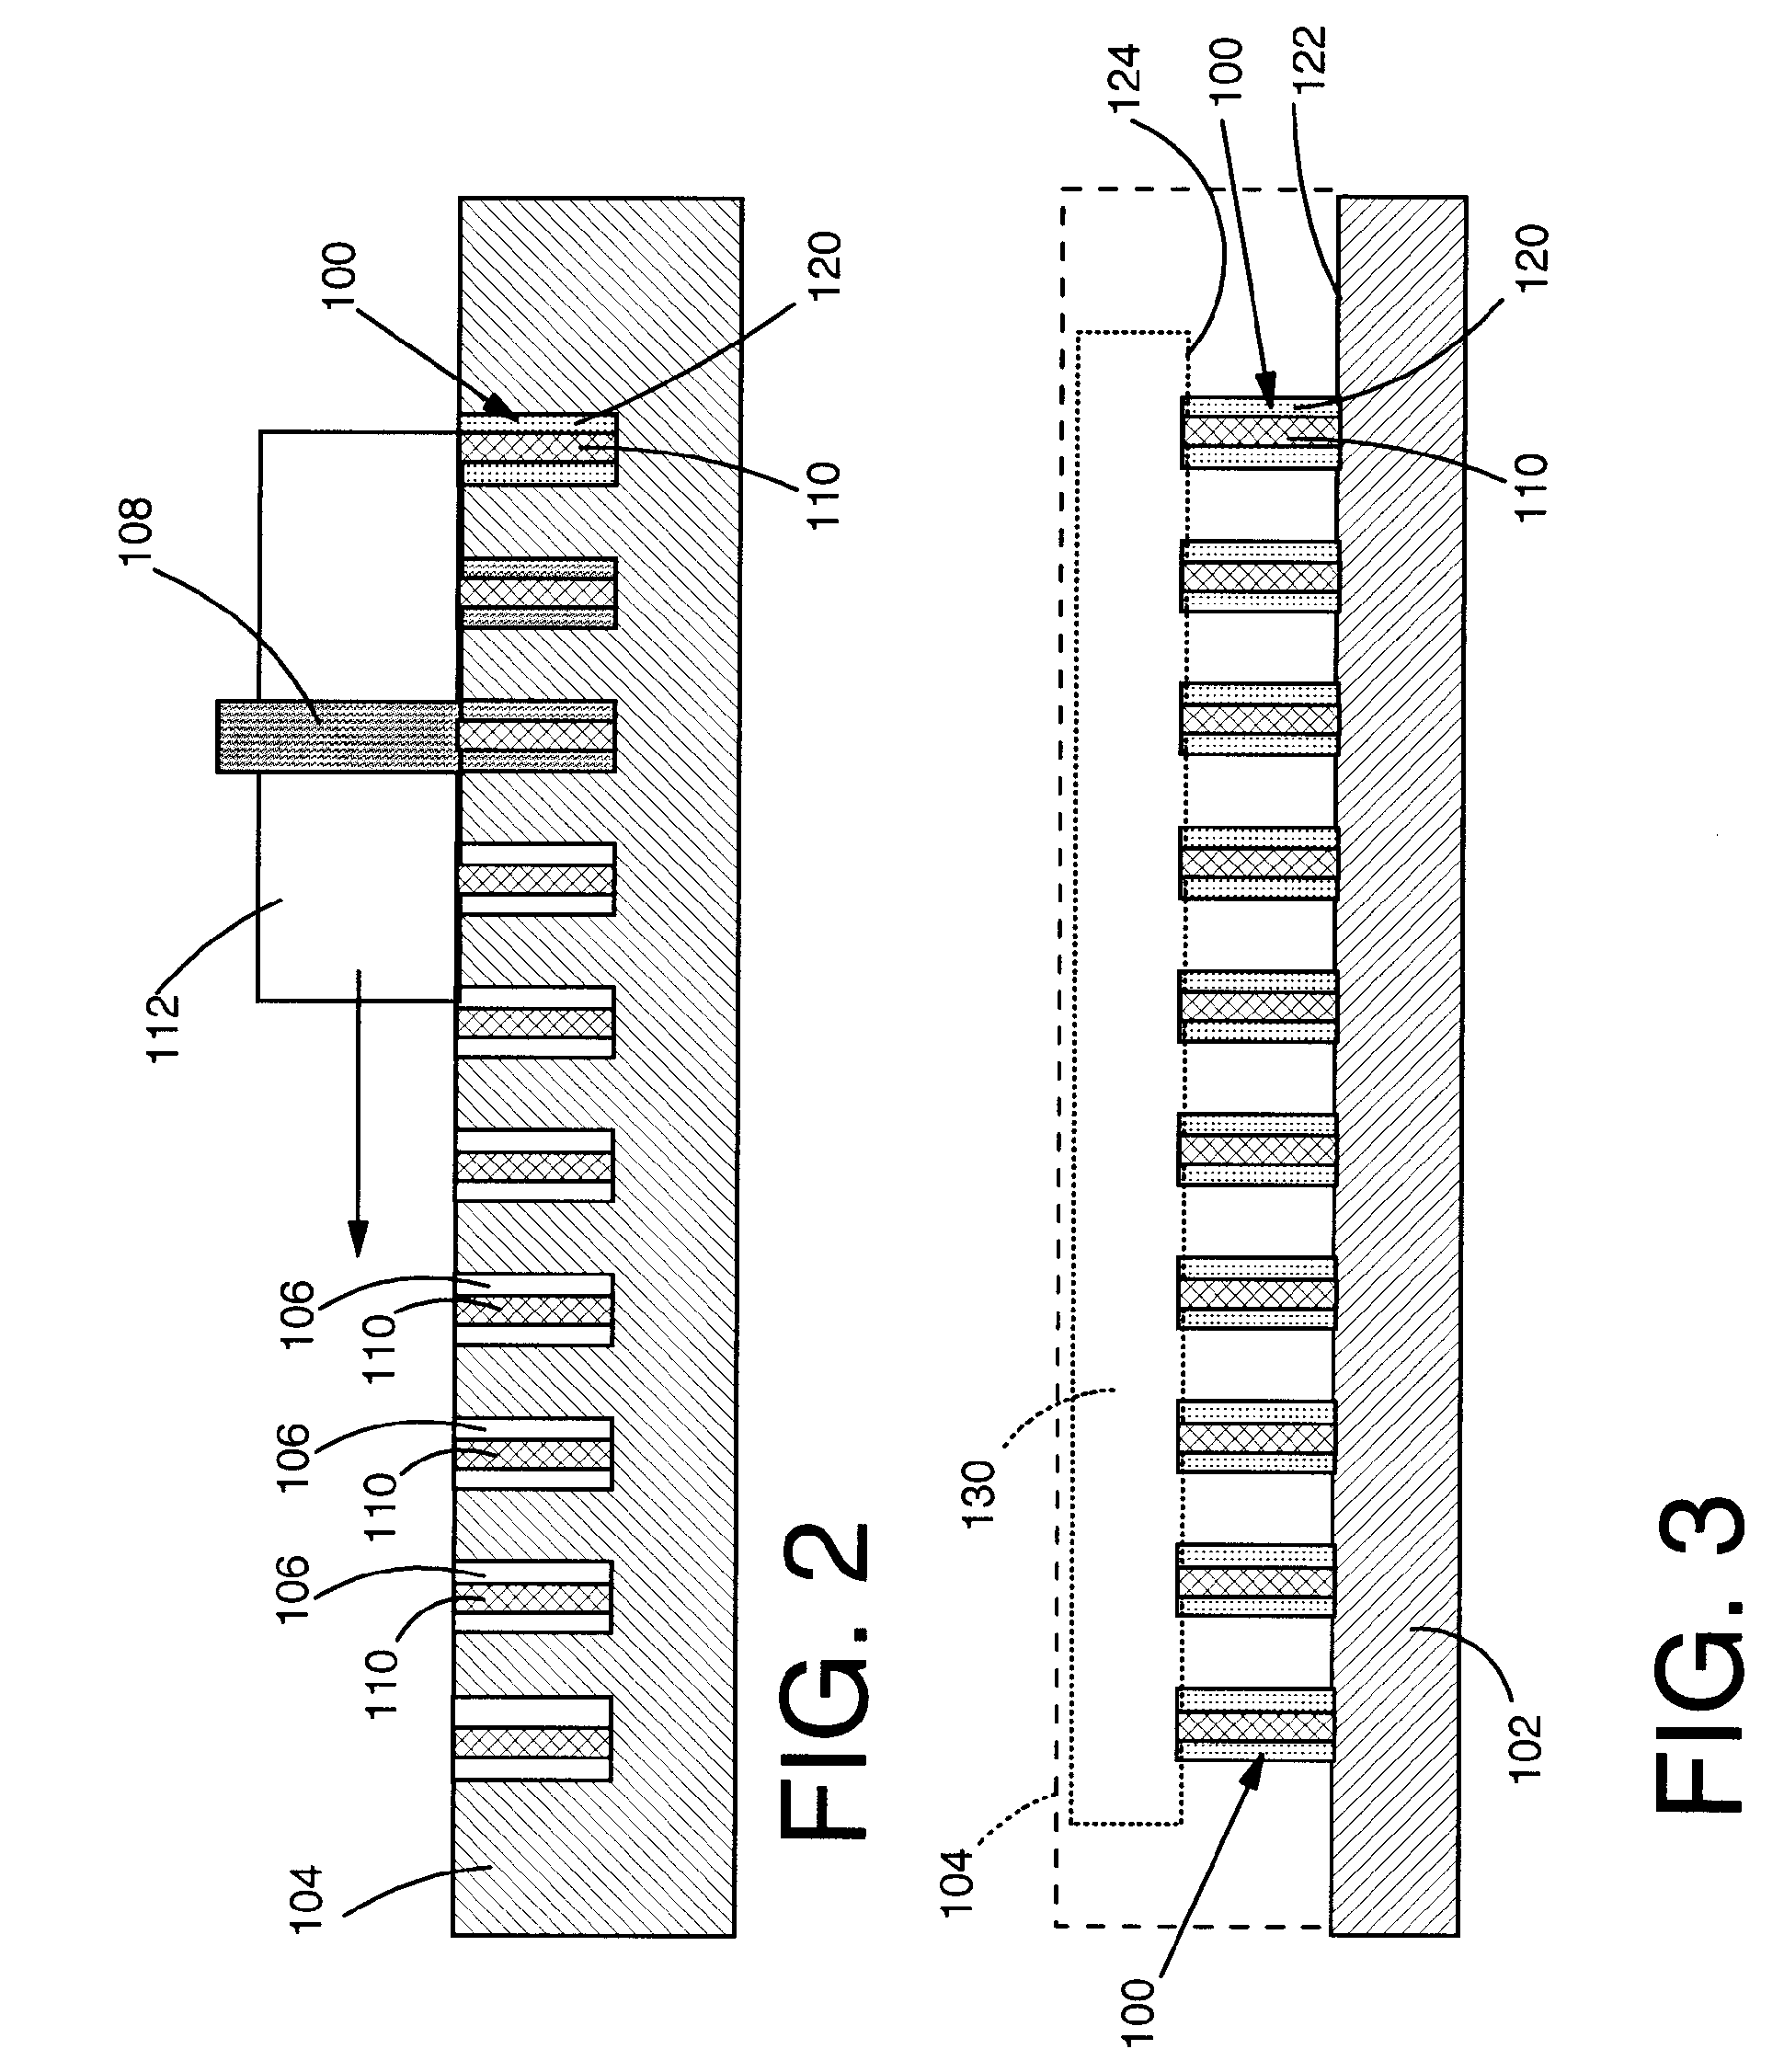 Composite interconnect structure using injection molded solder technique